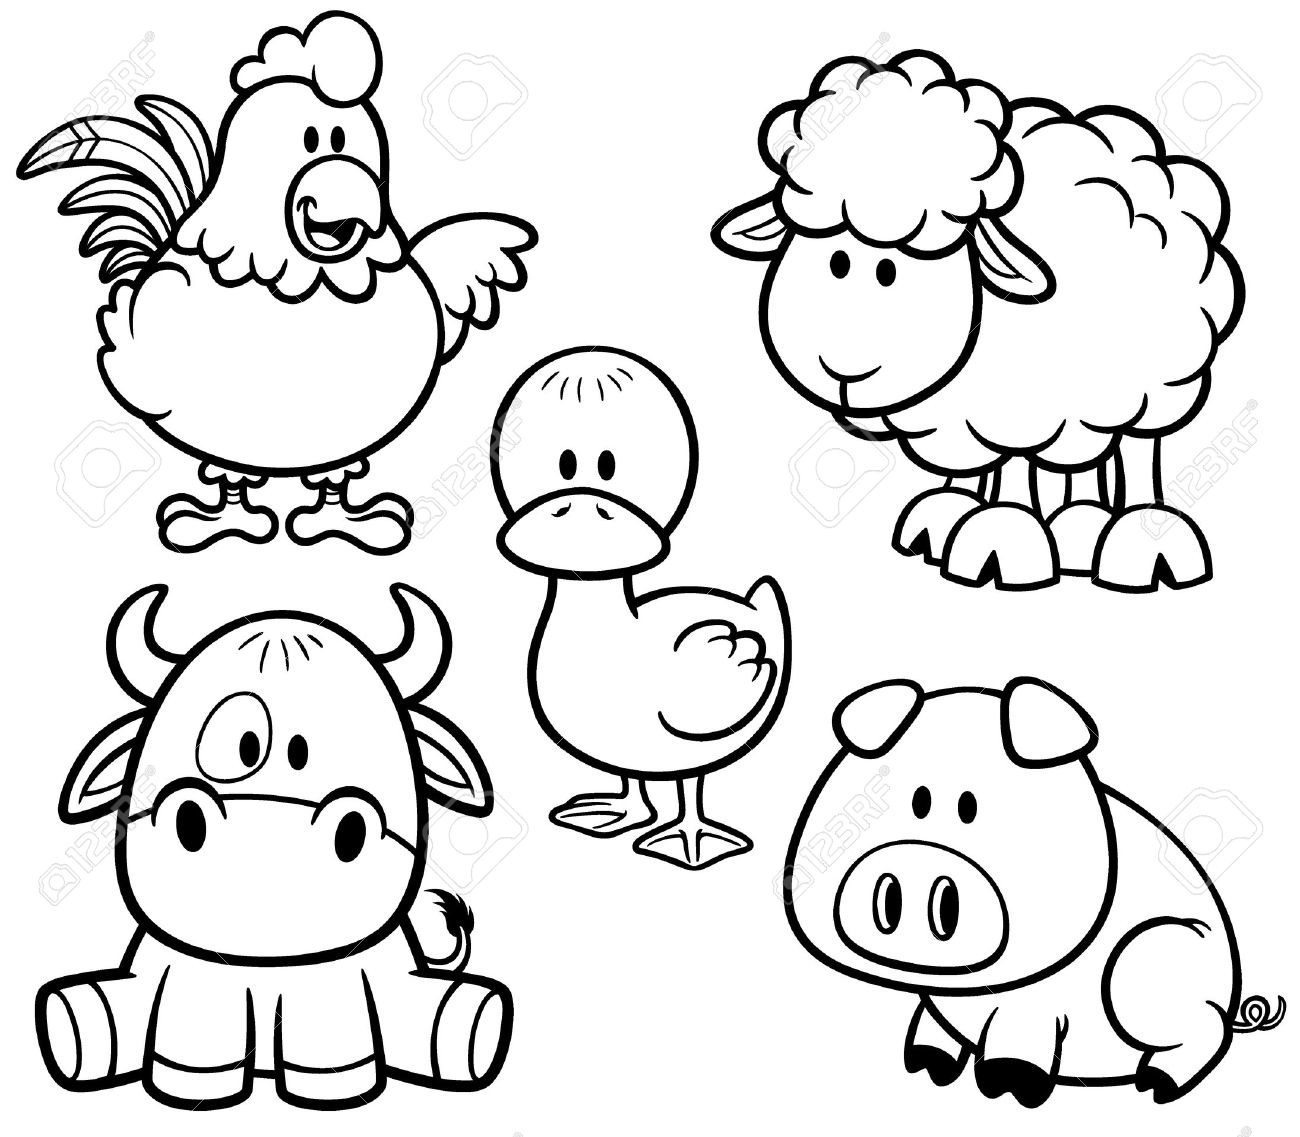 Baby Farm Animal Coloring Pages
 Cute Baby Farm Animal Coloring Pages Best Coloring Pages